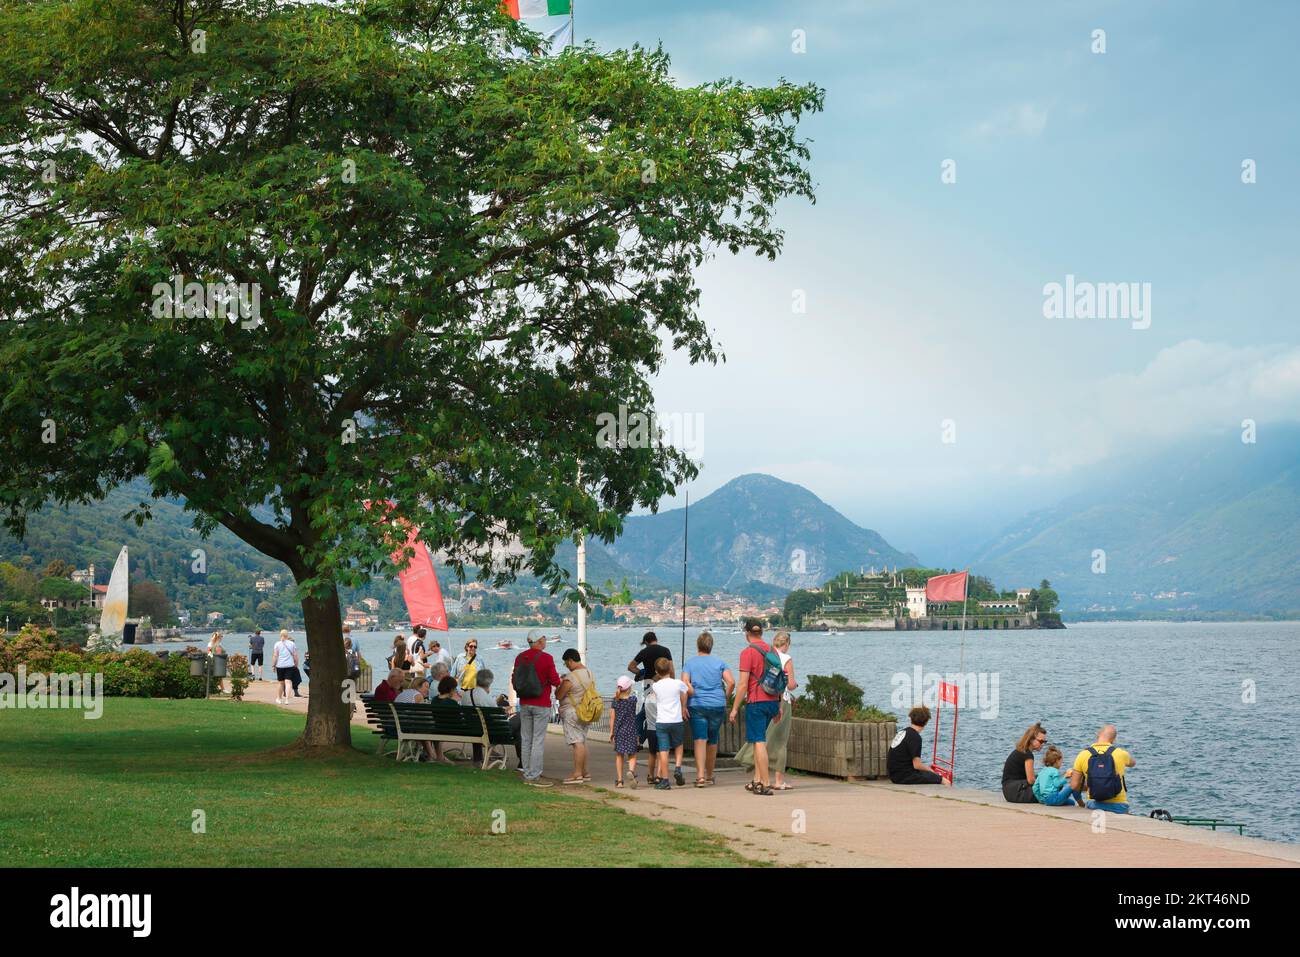 Stresa Lake Maggiore, view in summer of people walking the Passeggiata Lungolago on the Stresa waterfront with Isola Bella visible in the lake, Italy Stock Photo